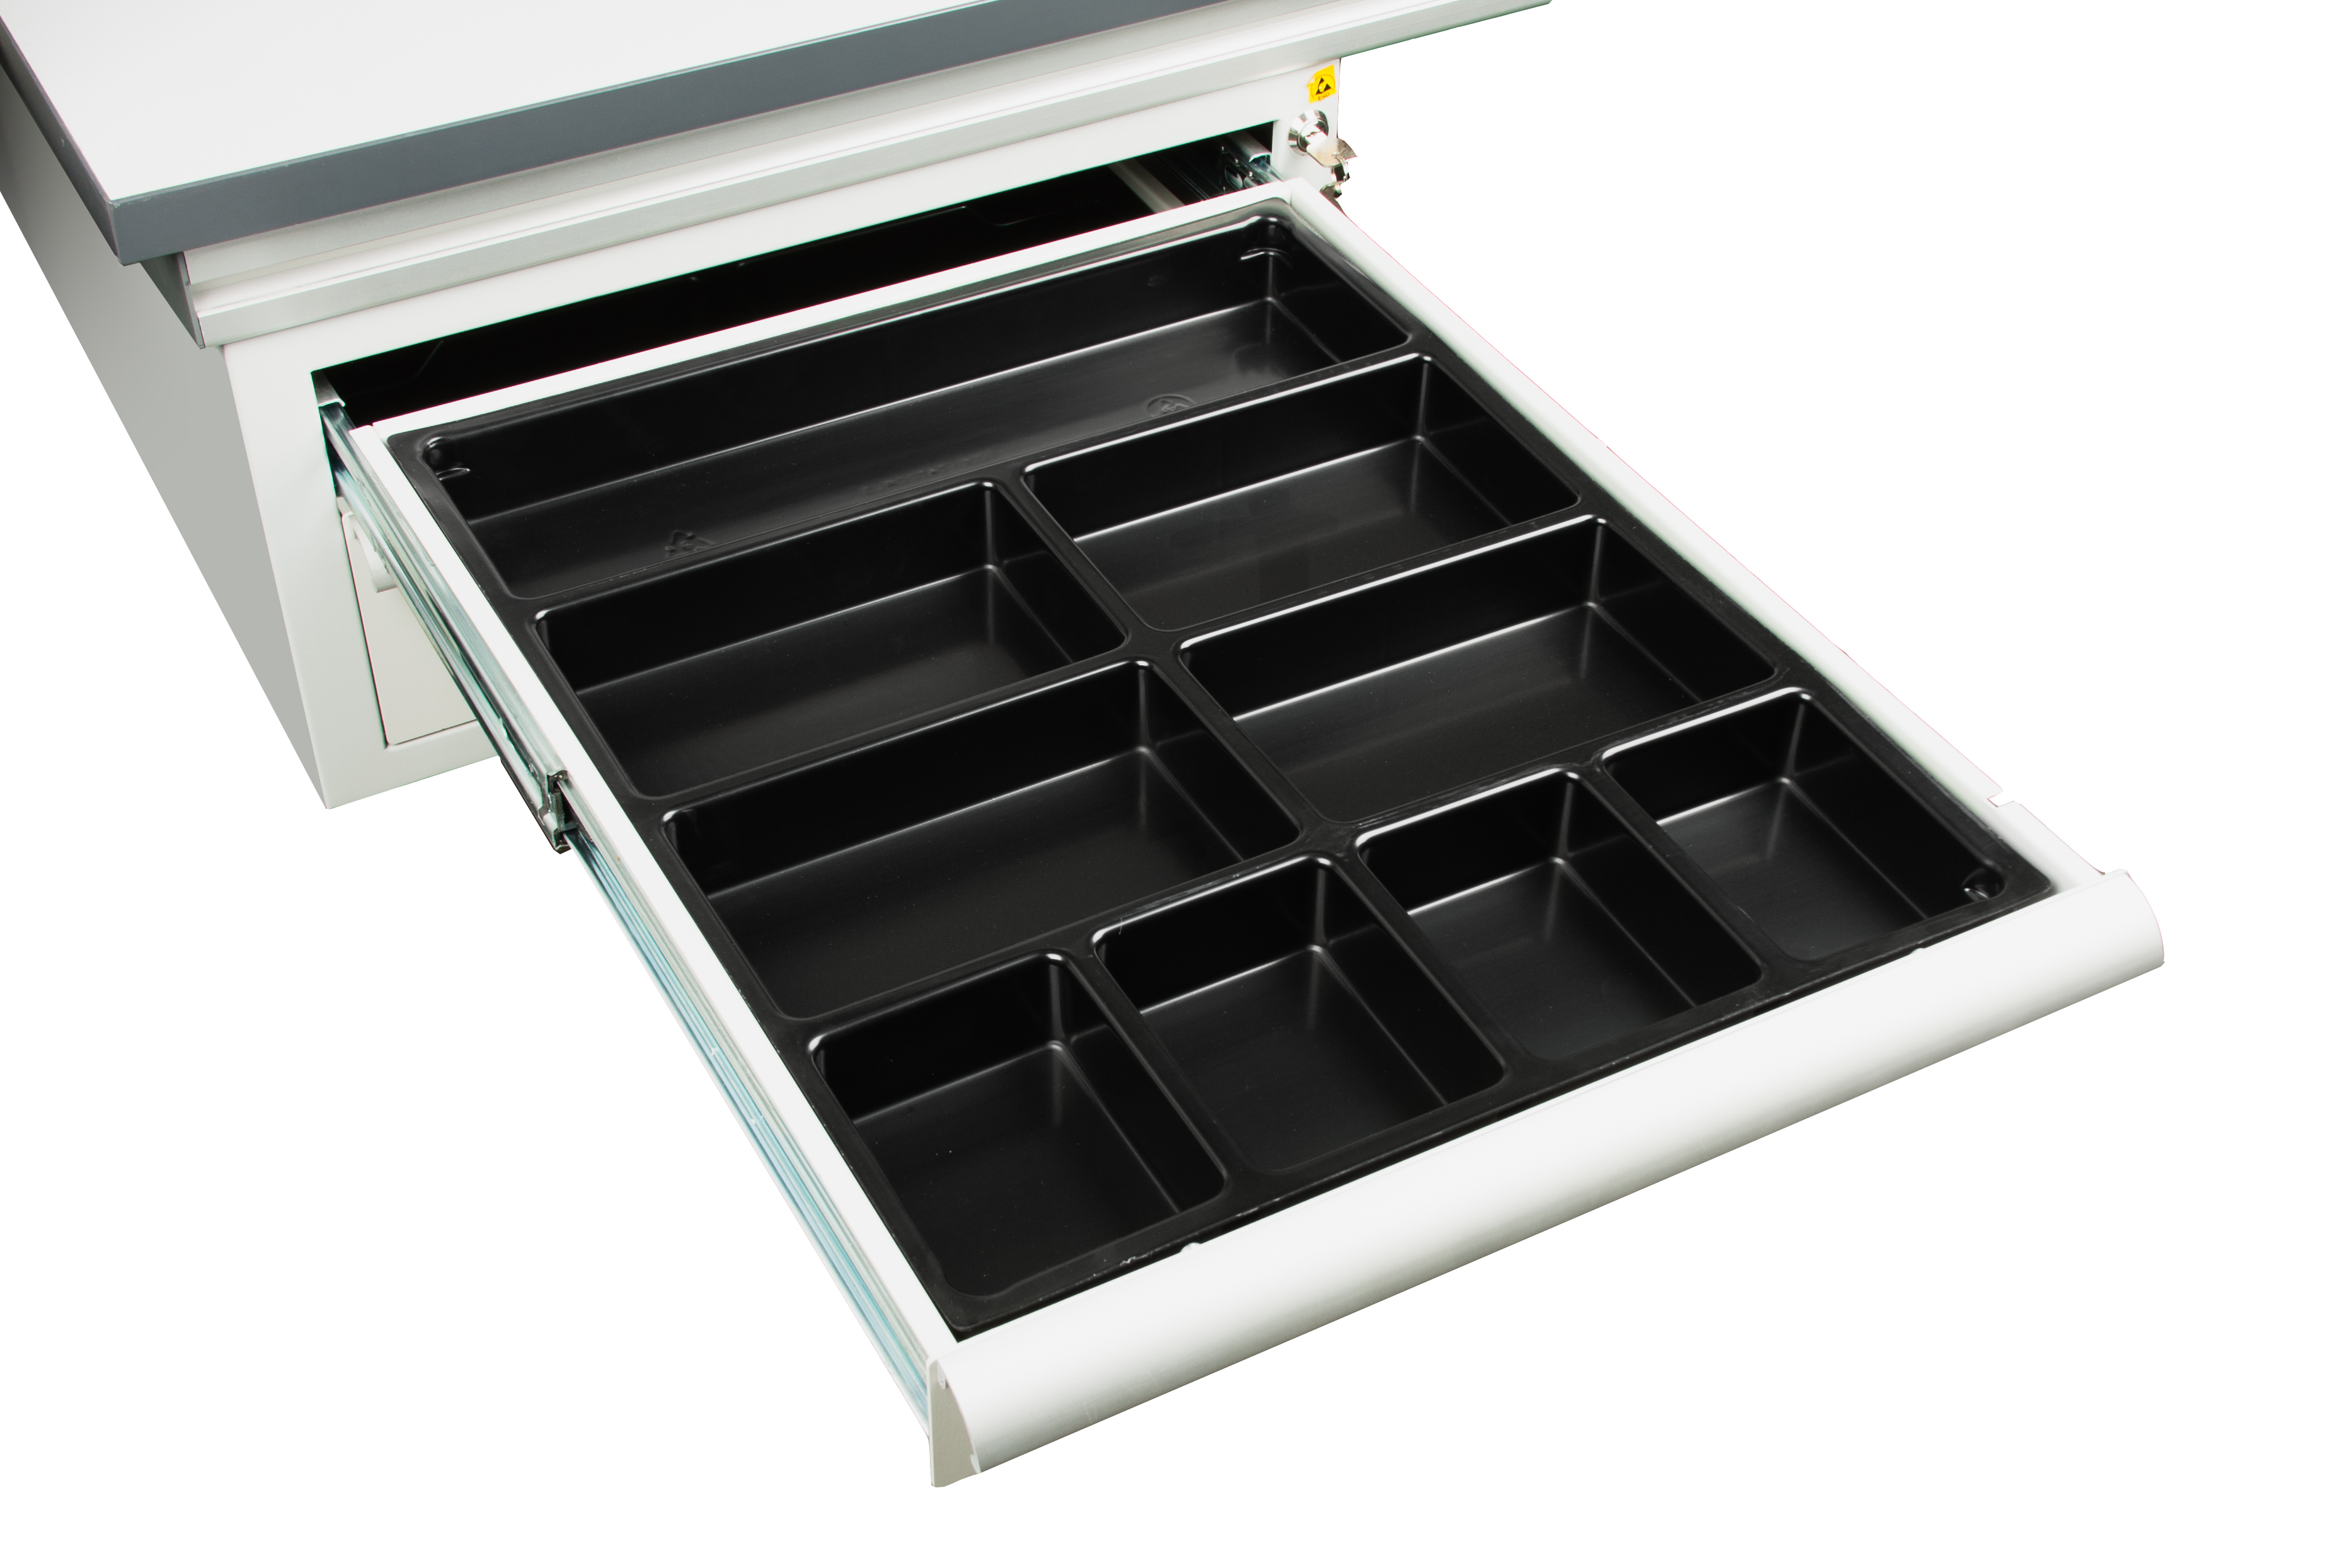 What are some different types of plastic trays?